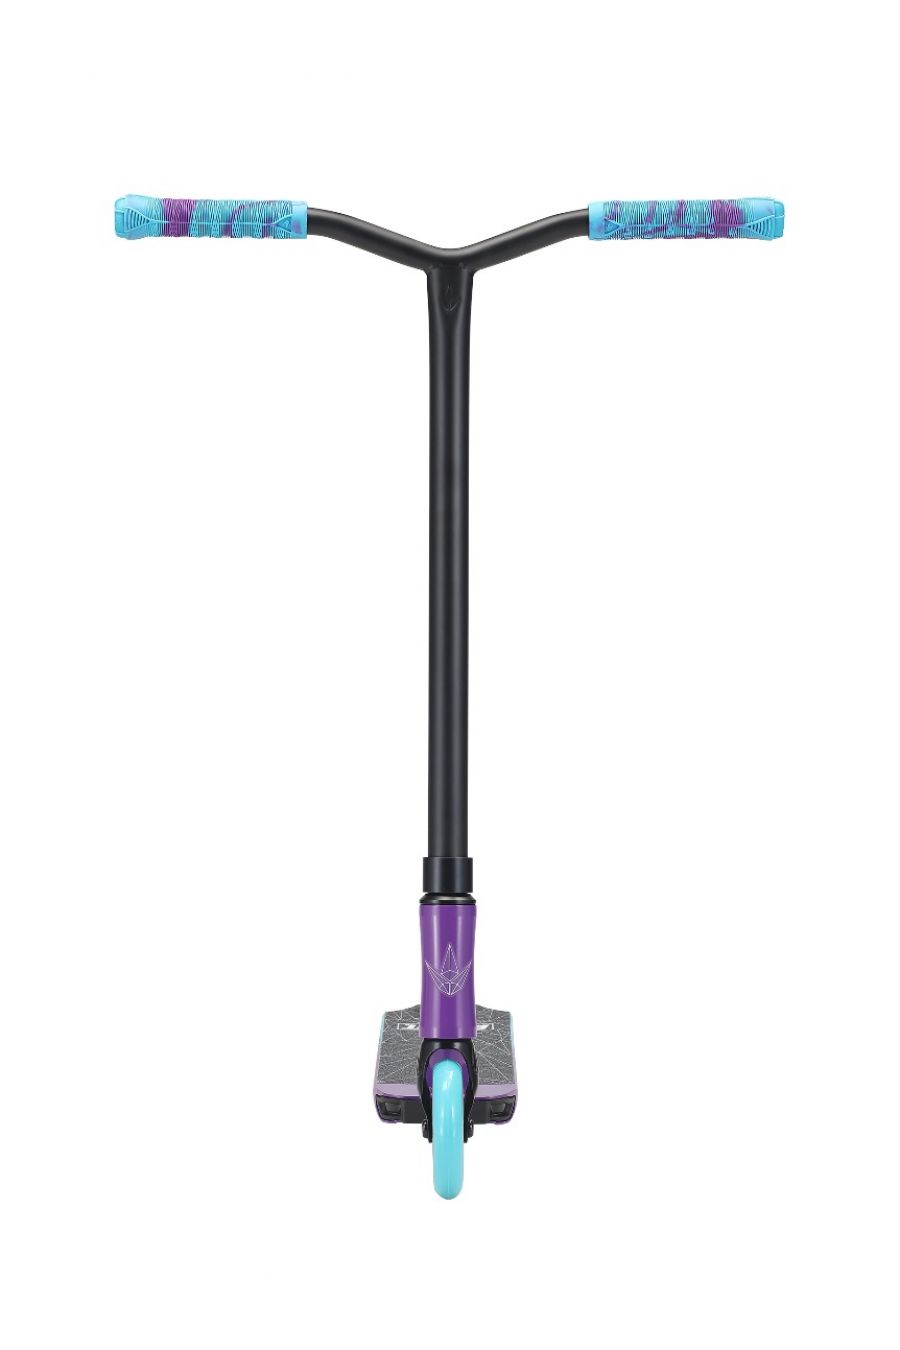 Envy One S3 Complete Scooter (Purple / Teal)